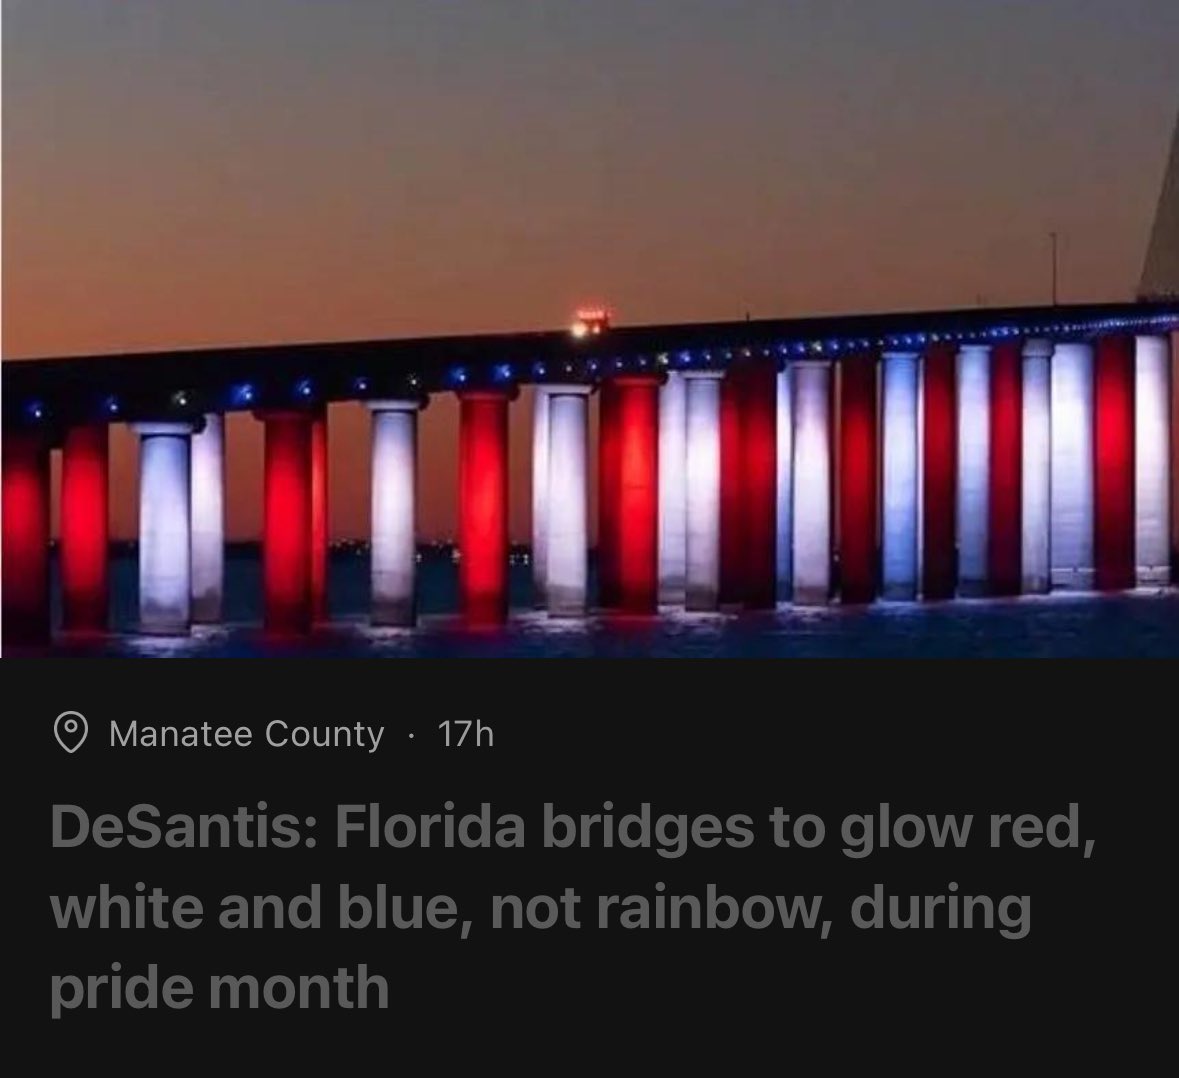 Ron DeSatan continues his maniacal reign over the GunShine State. Now he’s cancelling rainbow themed lighting of bridges, across Florida during Pride Month. He’s such a petty, hateful little man.